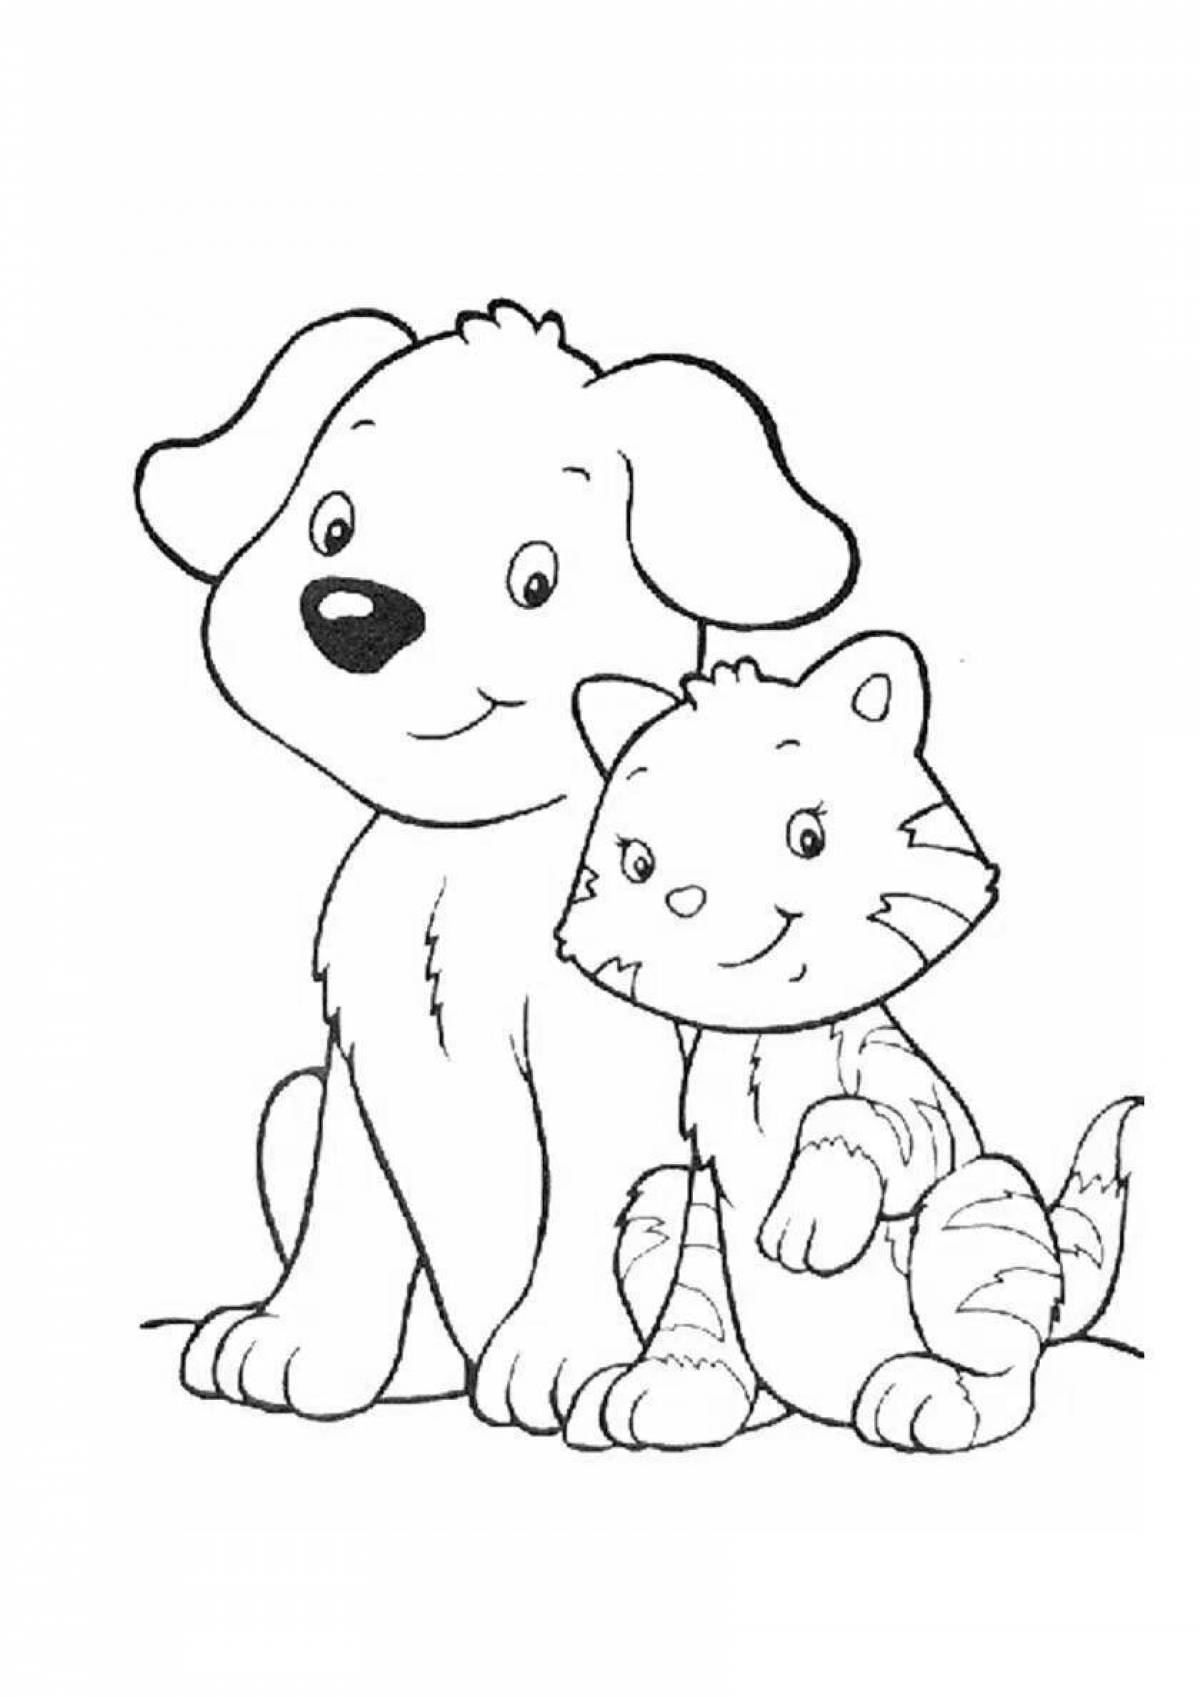 Coloring cat and dog together